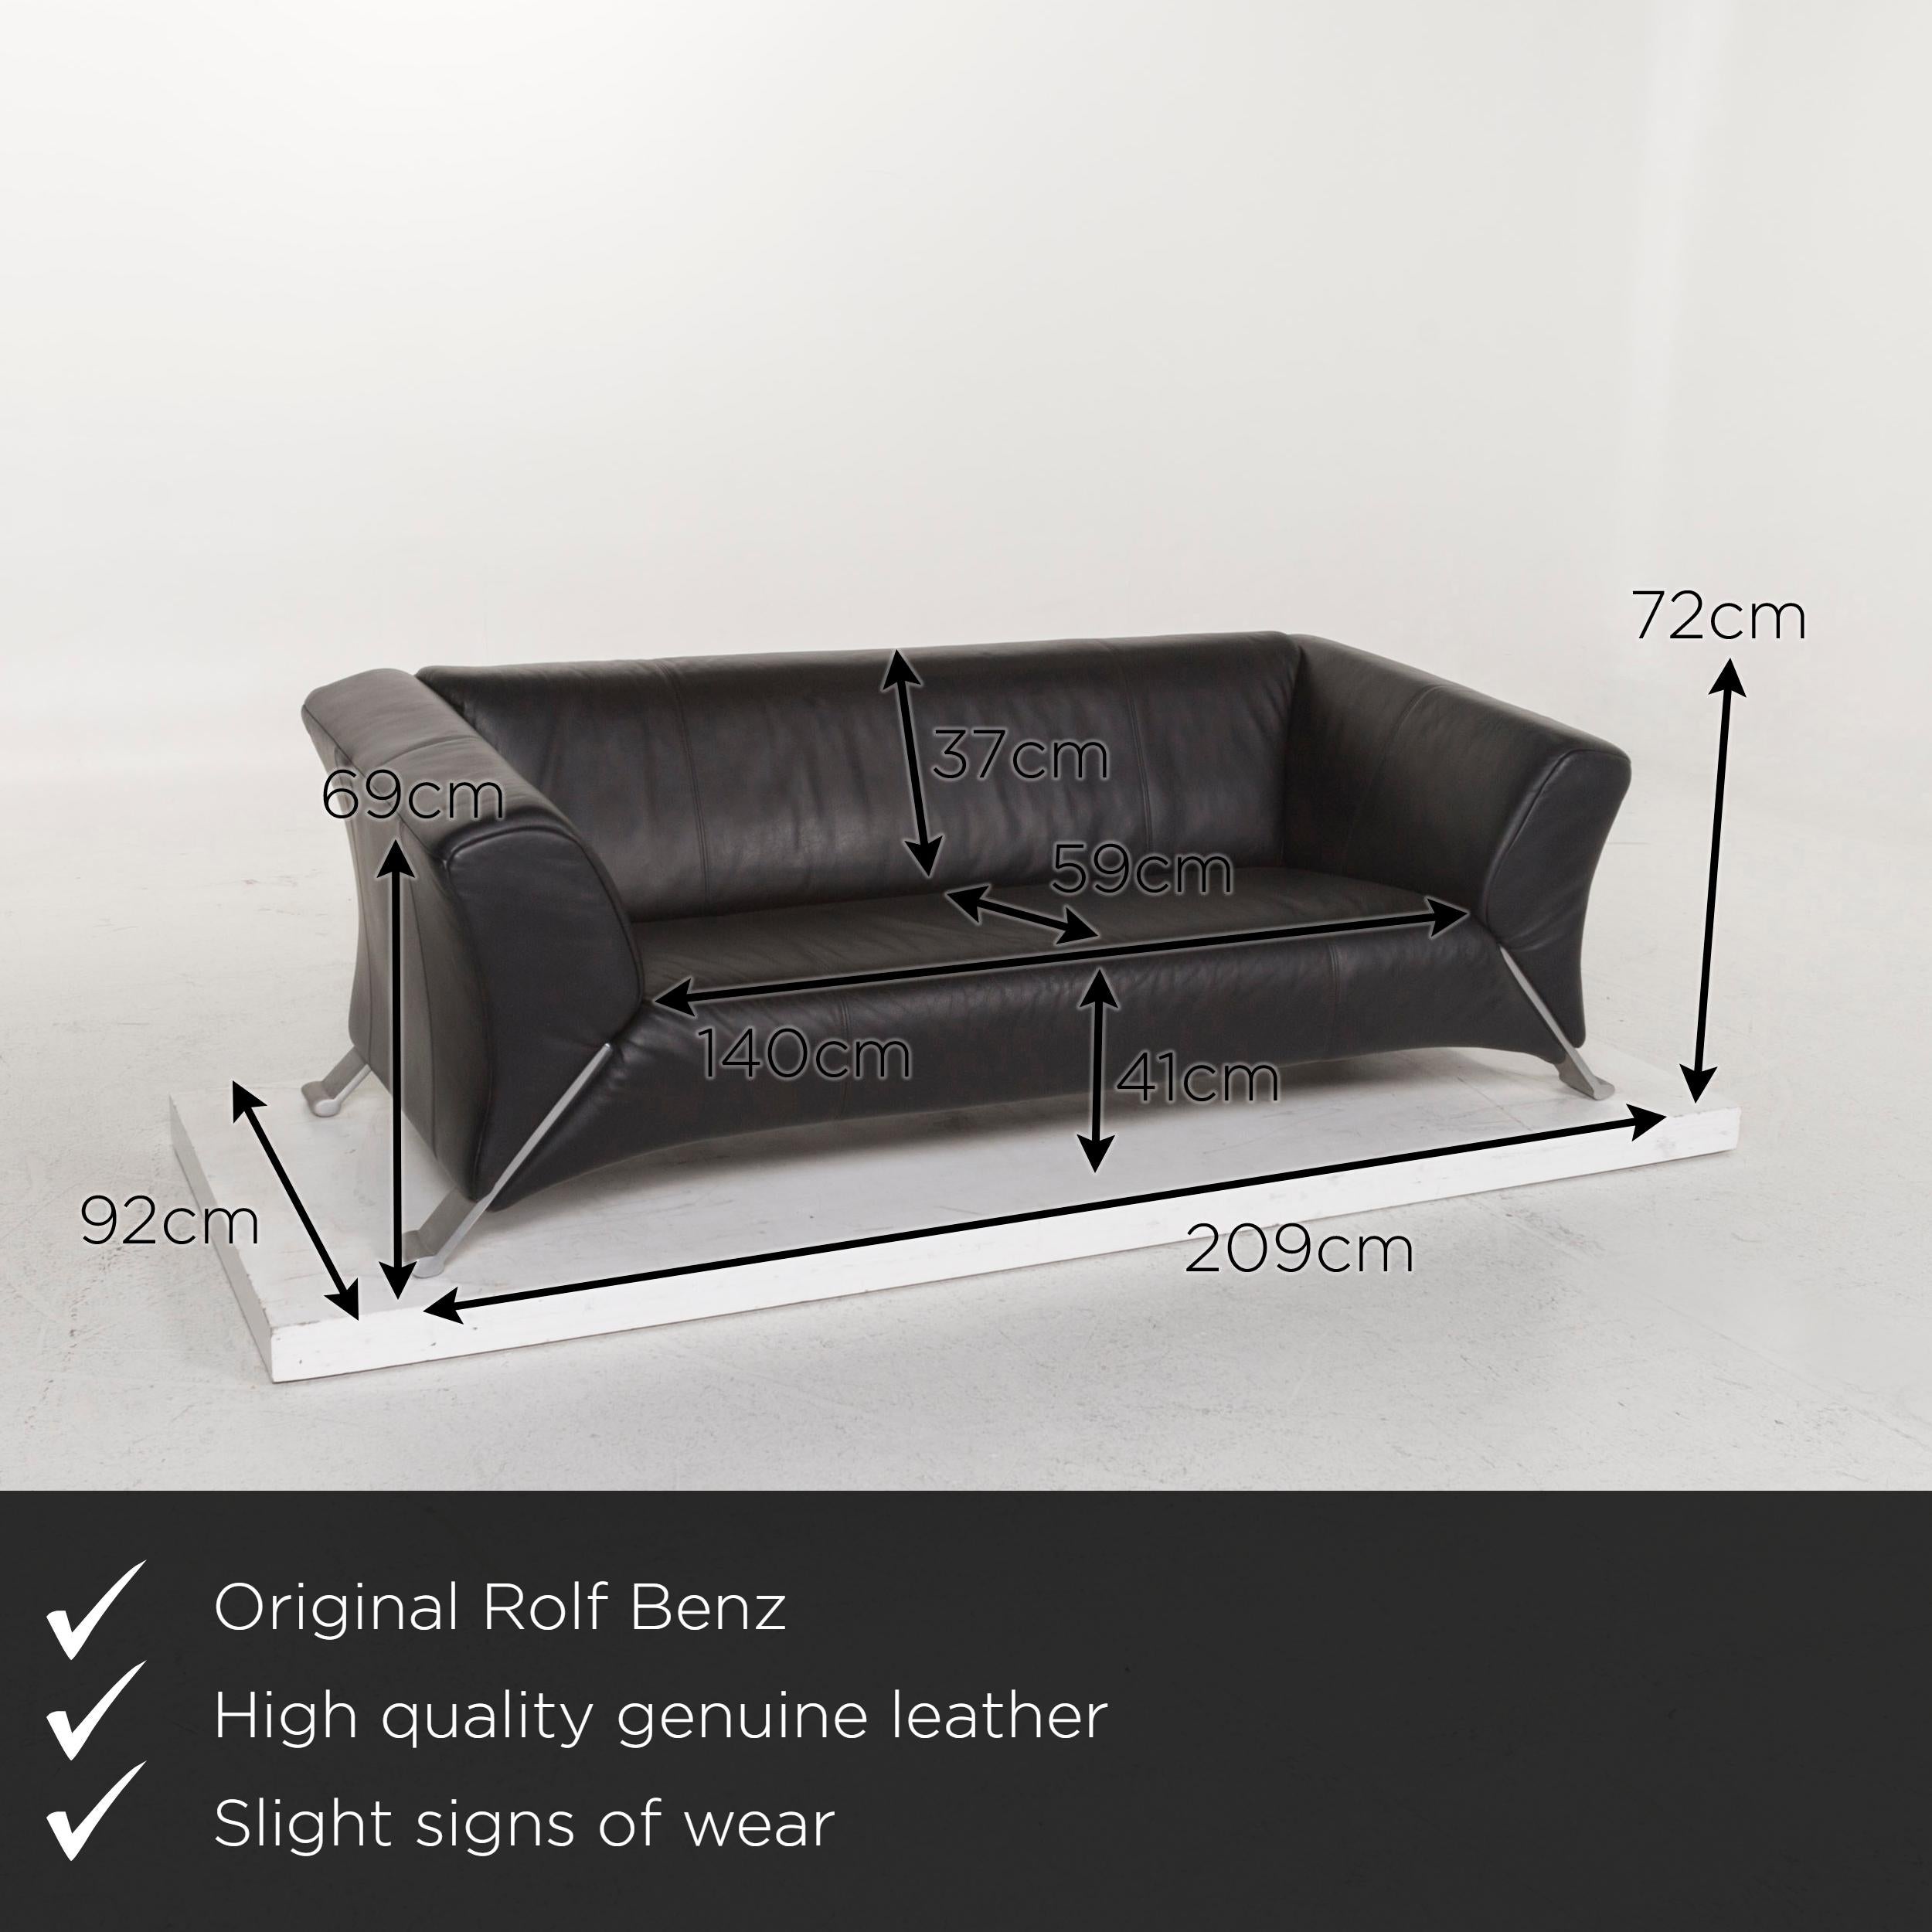 We present to you a Rolf Benz 322 leather sofa black three-seat.
 

 Product measurements in centimeters:
 

Depth 92
Width 209
Height 72
Seat height 41
Rest height 69
Seat depth 59
Seat width 140
Back height 37.
 